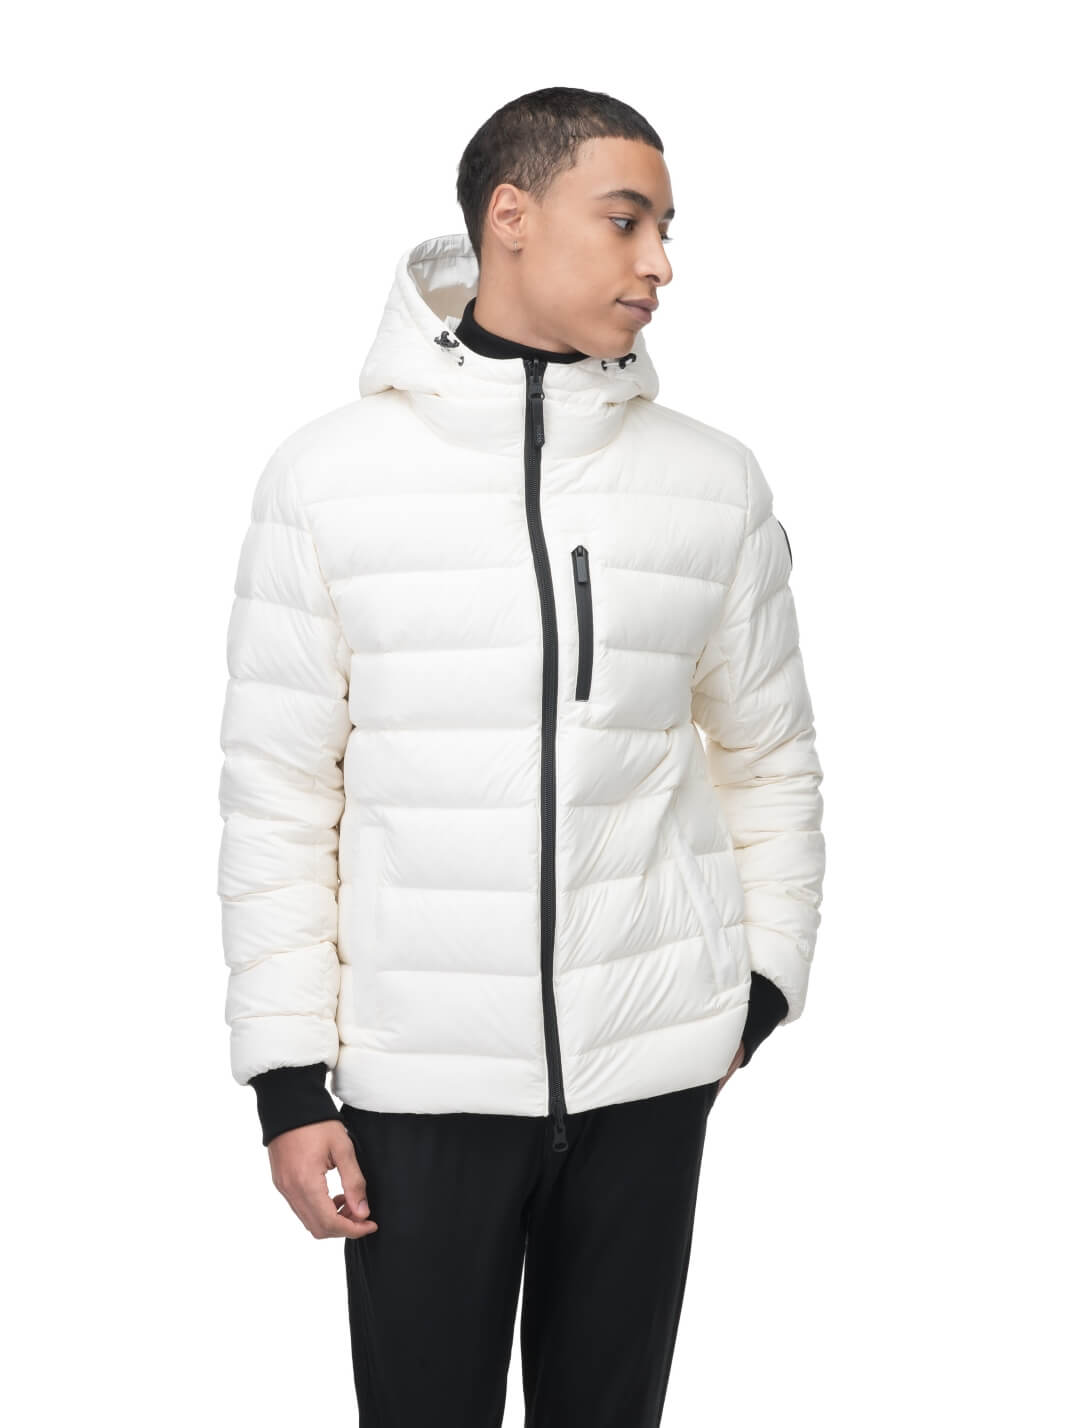 Chris Men's Mid Weight Reversible Puffer Jacket in hip length, Canadian duck down insulation, non-removable adjustable hood, ribbed cuffs, and quilted body on reversible side, in Chalk